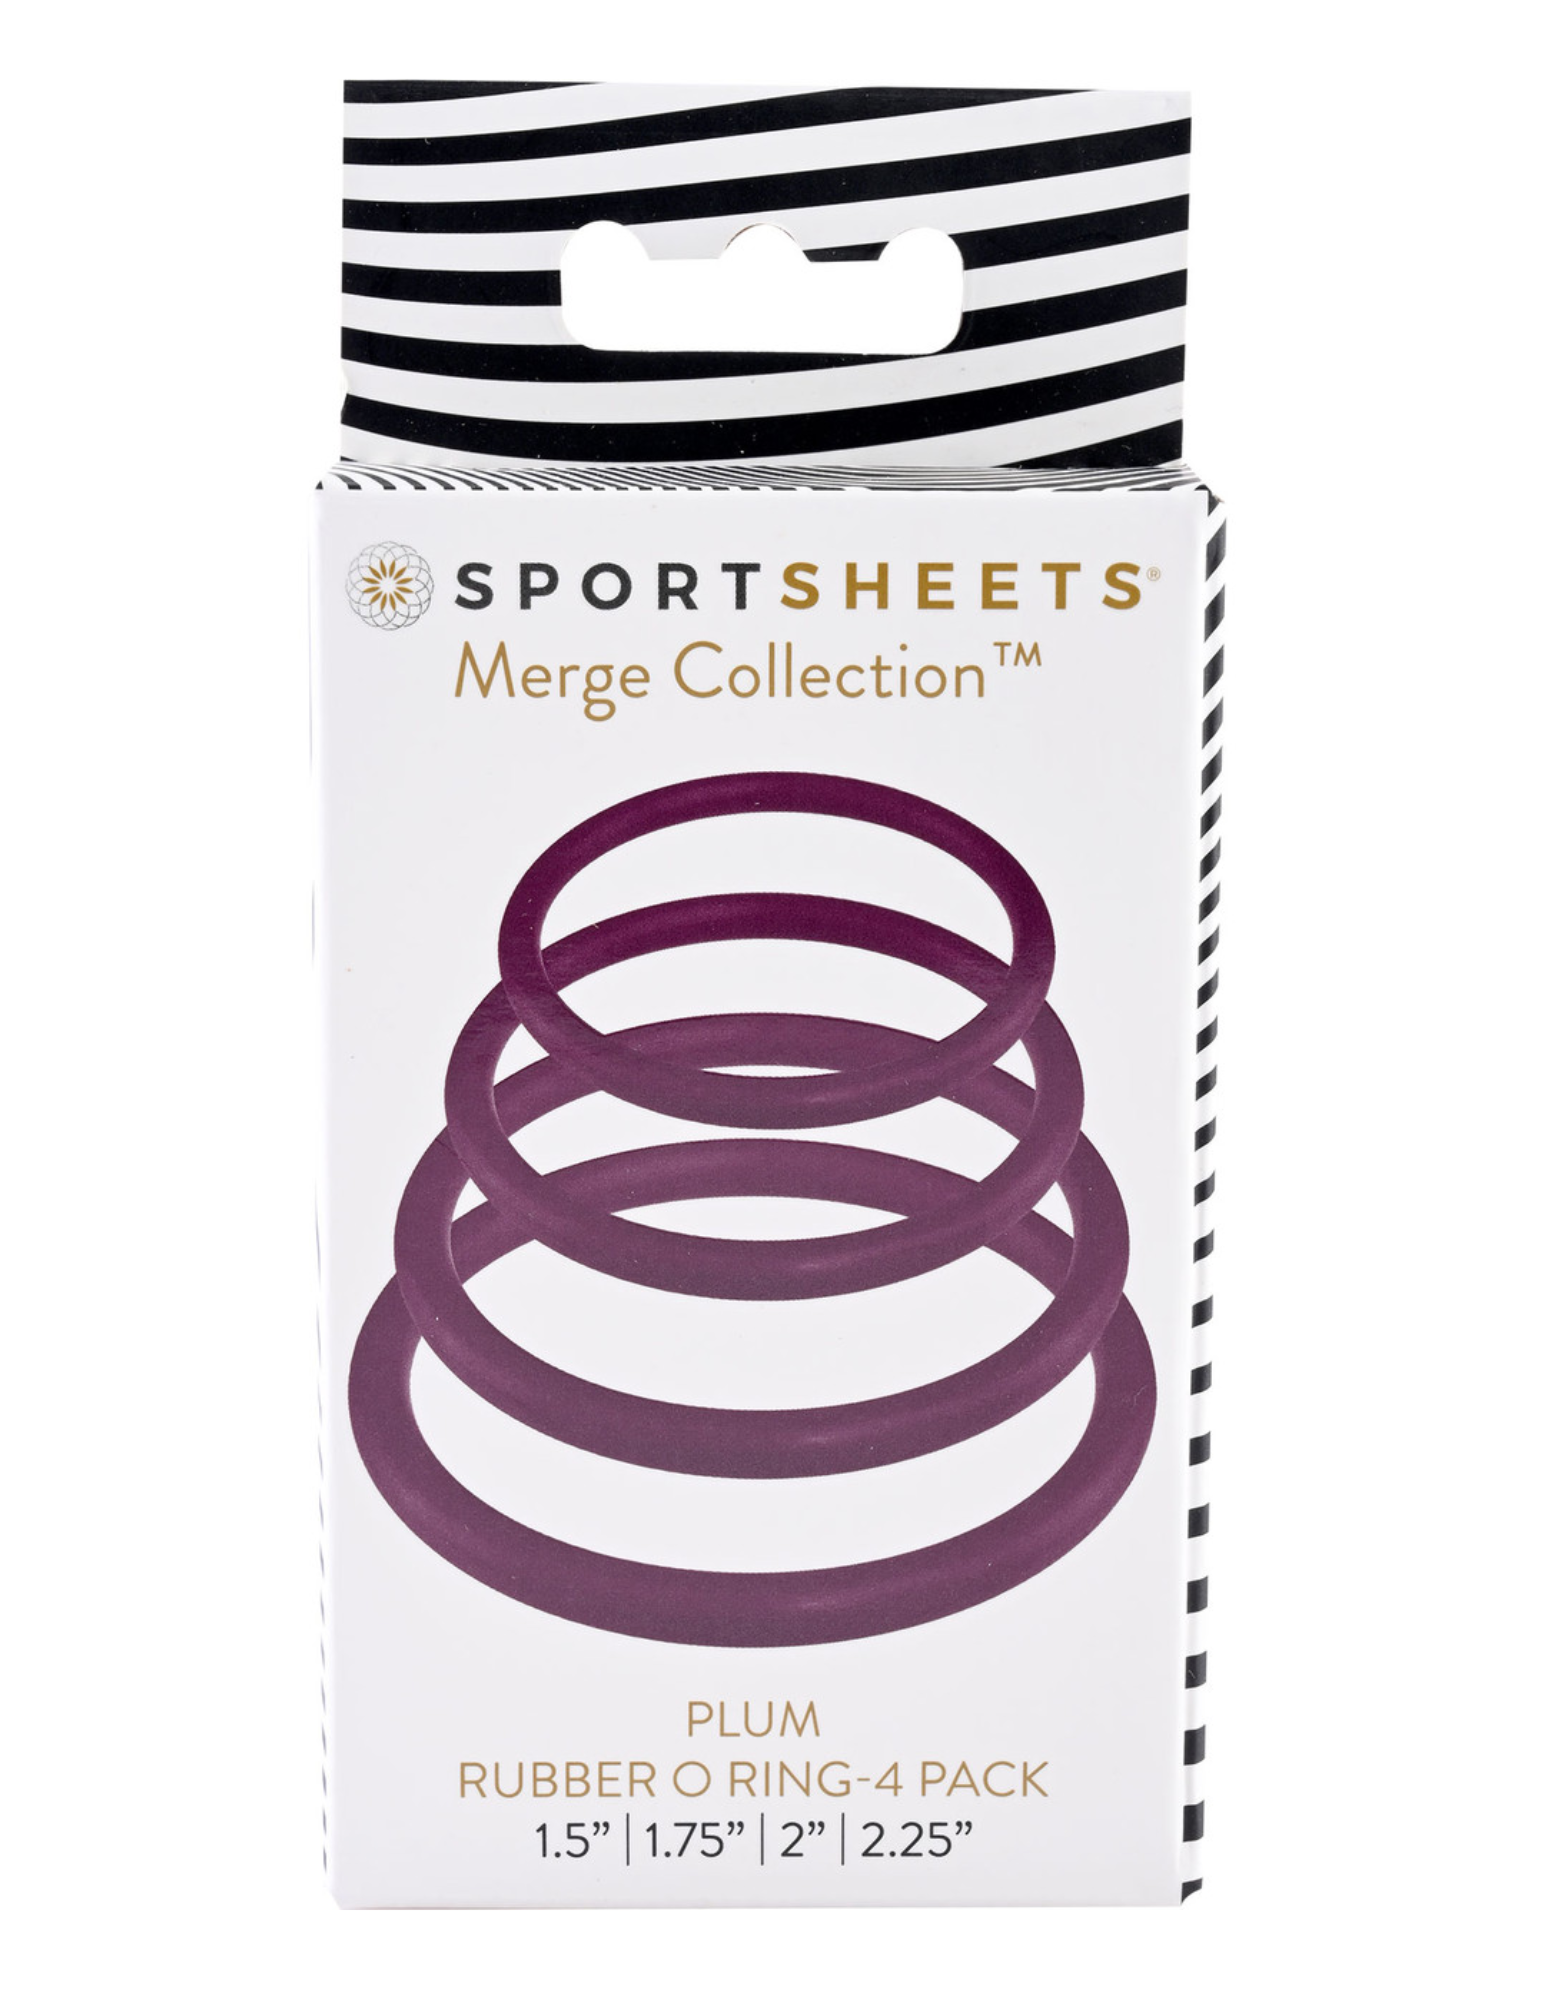 Photo of the box for the Merge Collection Rubber O-Ring (plum) from Sportsheets.